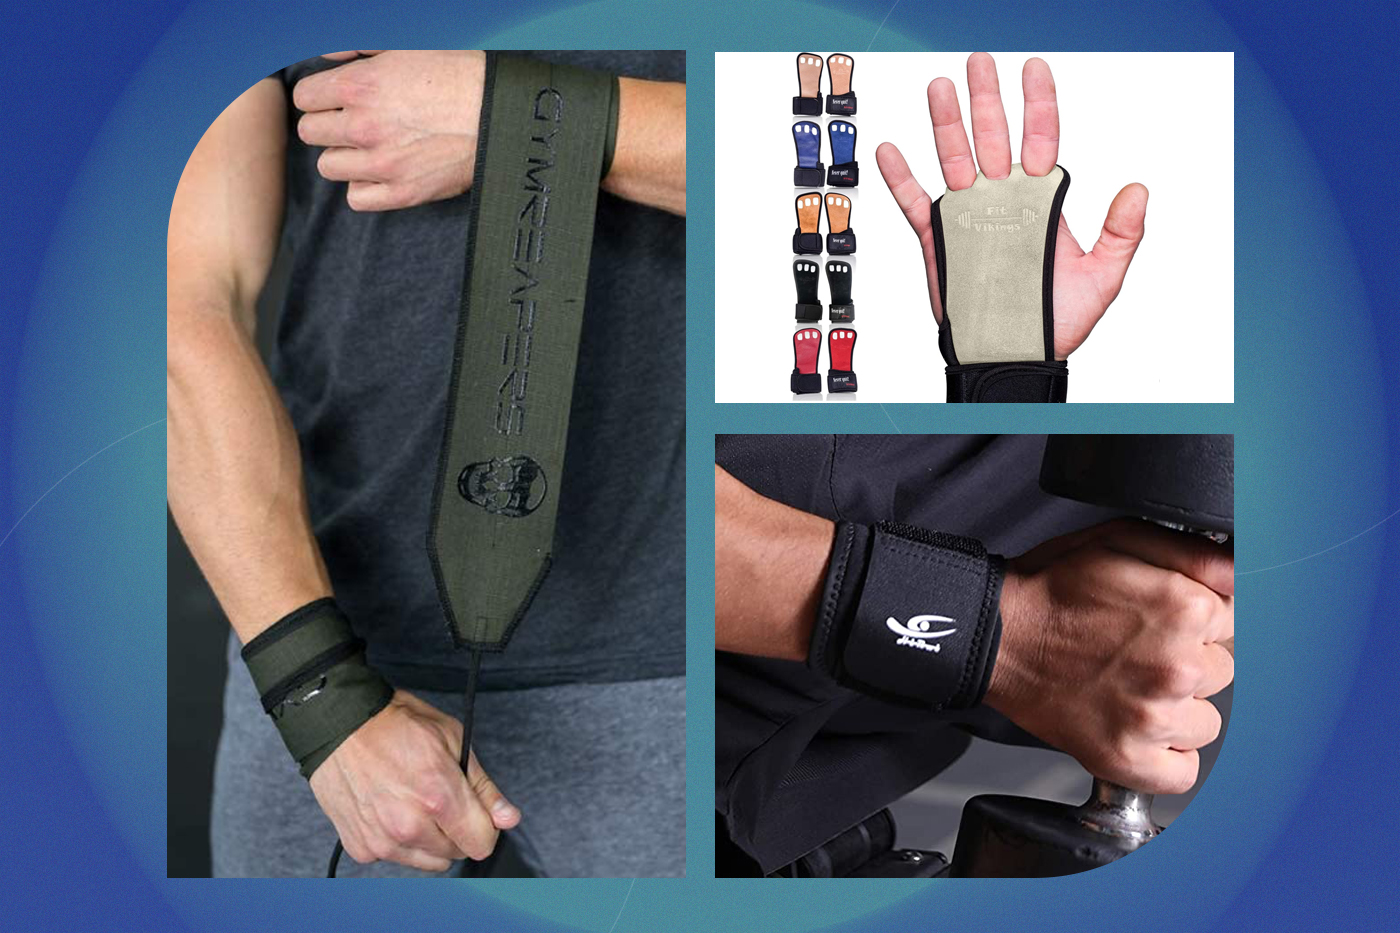 Weightlifting Straps and Wrist Wraps: high quality weightlifting